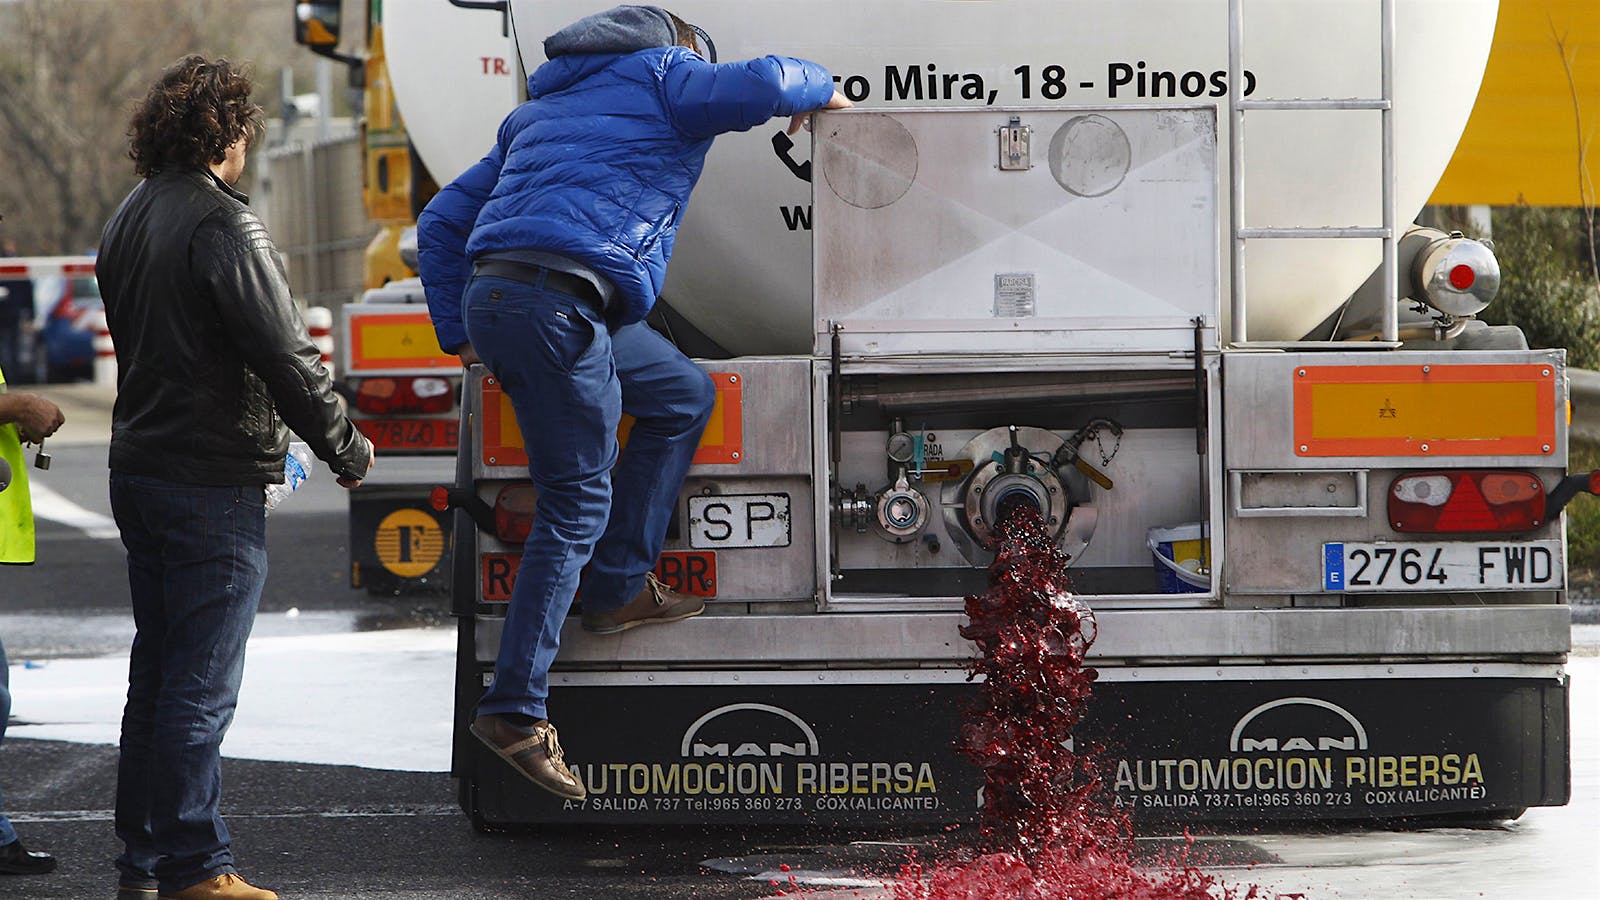 Man Guzzles Wine from Under Moving Tanker, Elaborate Scam on Champagne Heir: Shocking Acts of Winecrime Everywhere